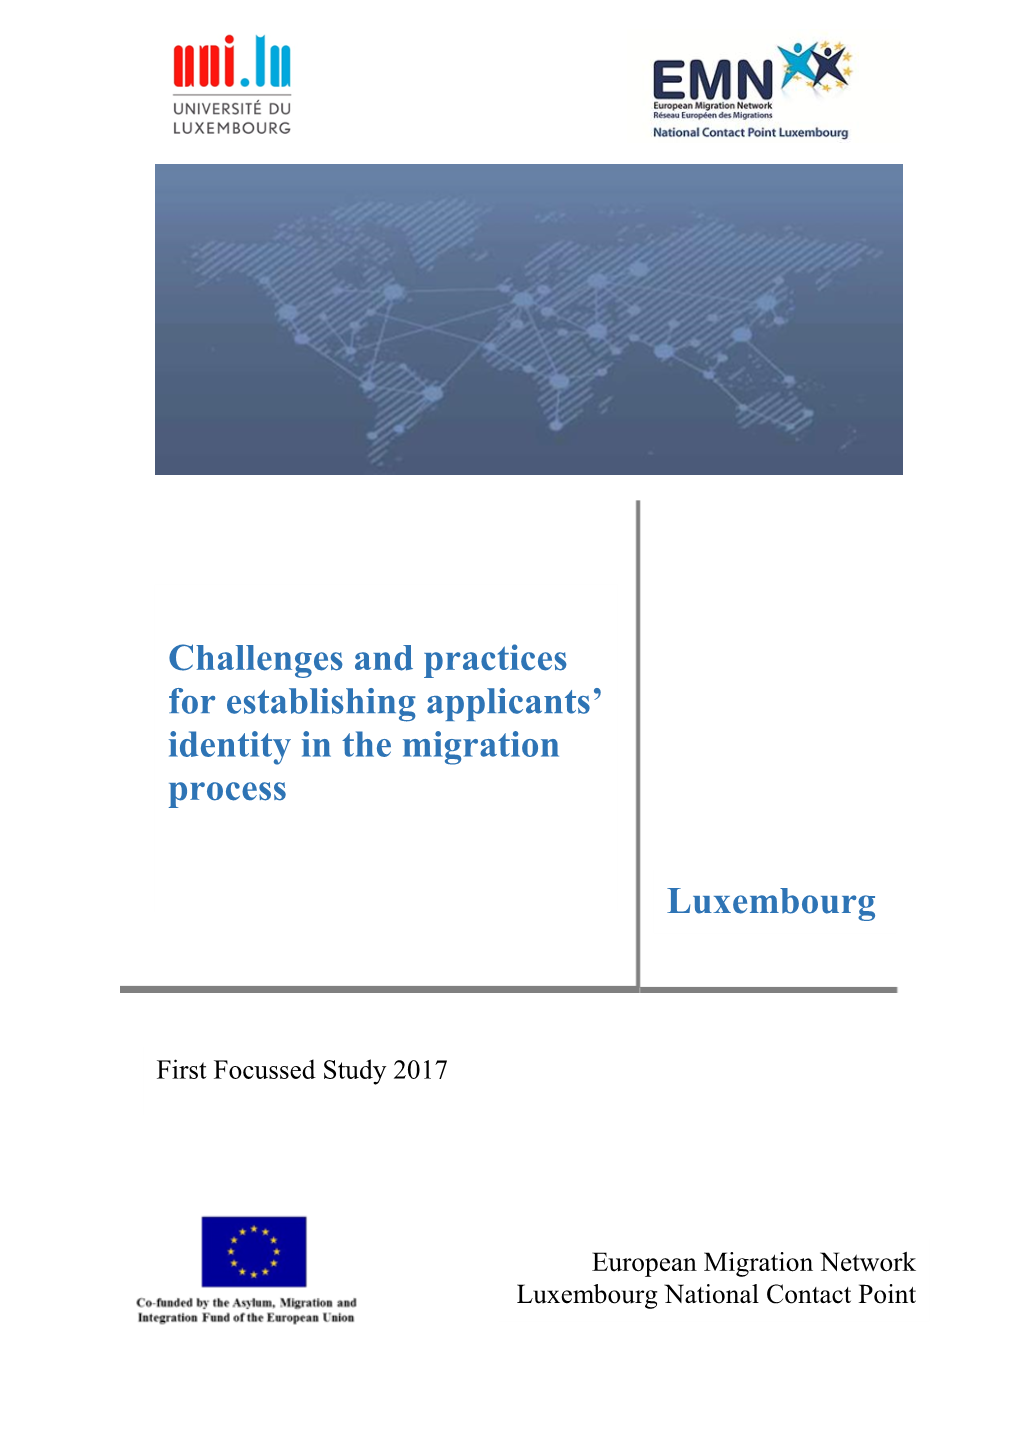 Challenges and Practices for Establishing Applicants’ Identity in the Migration Process